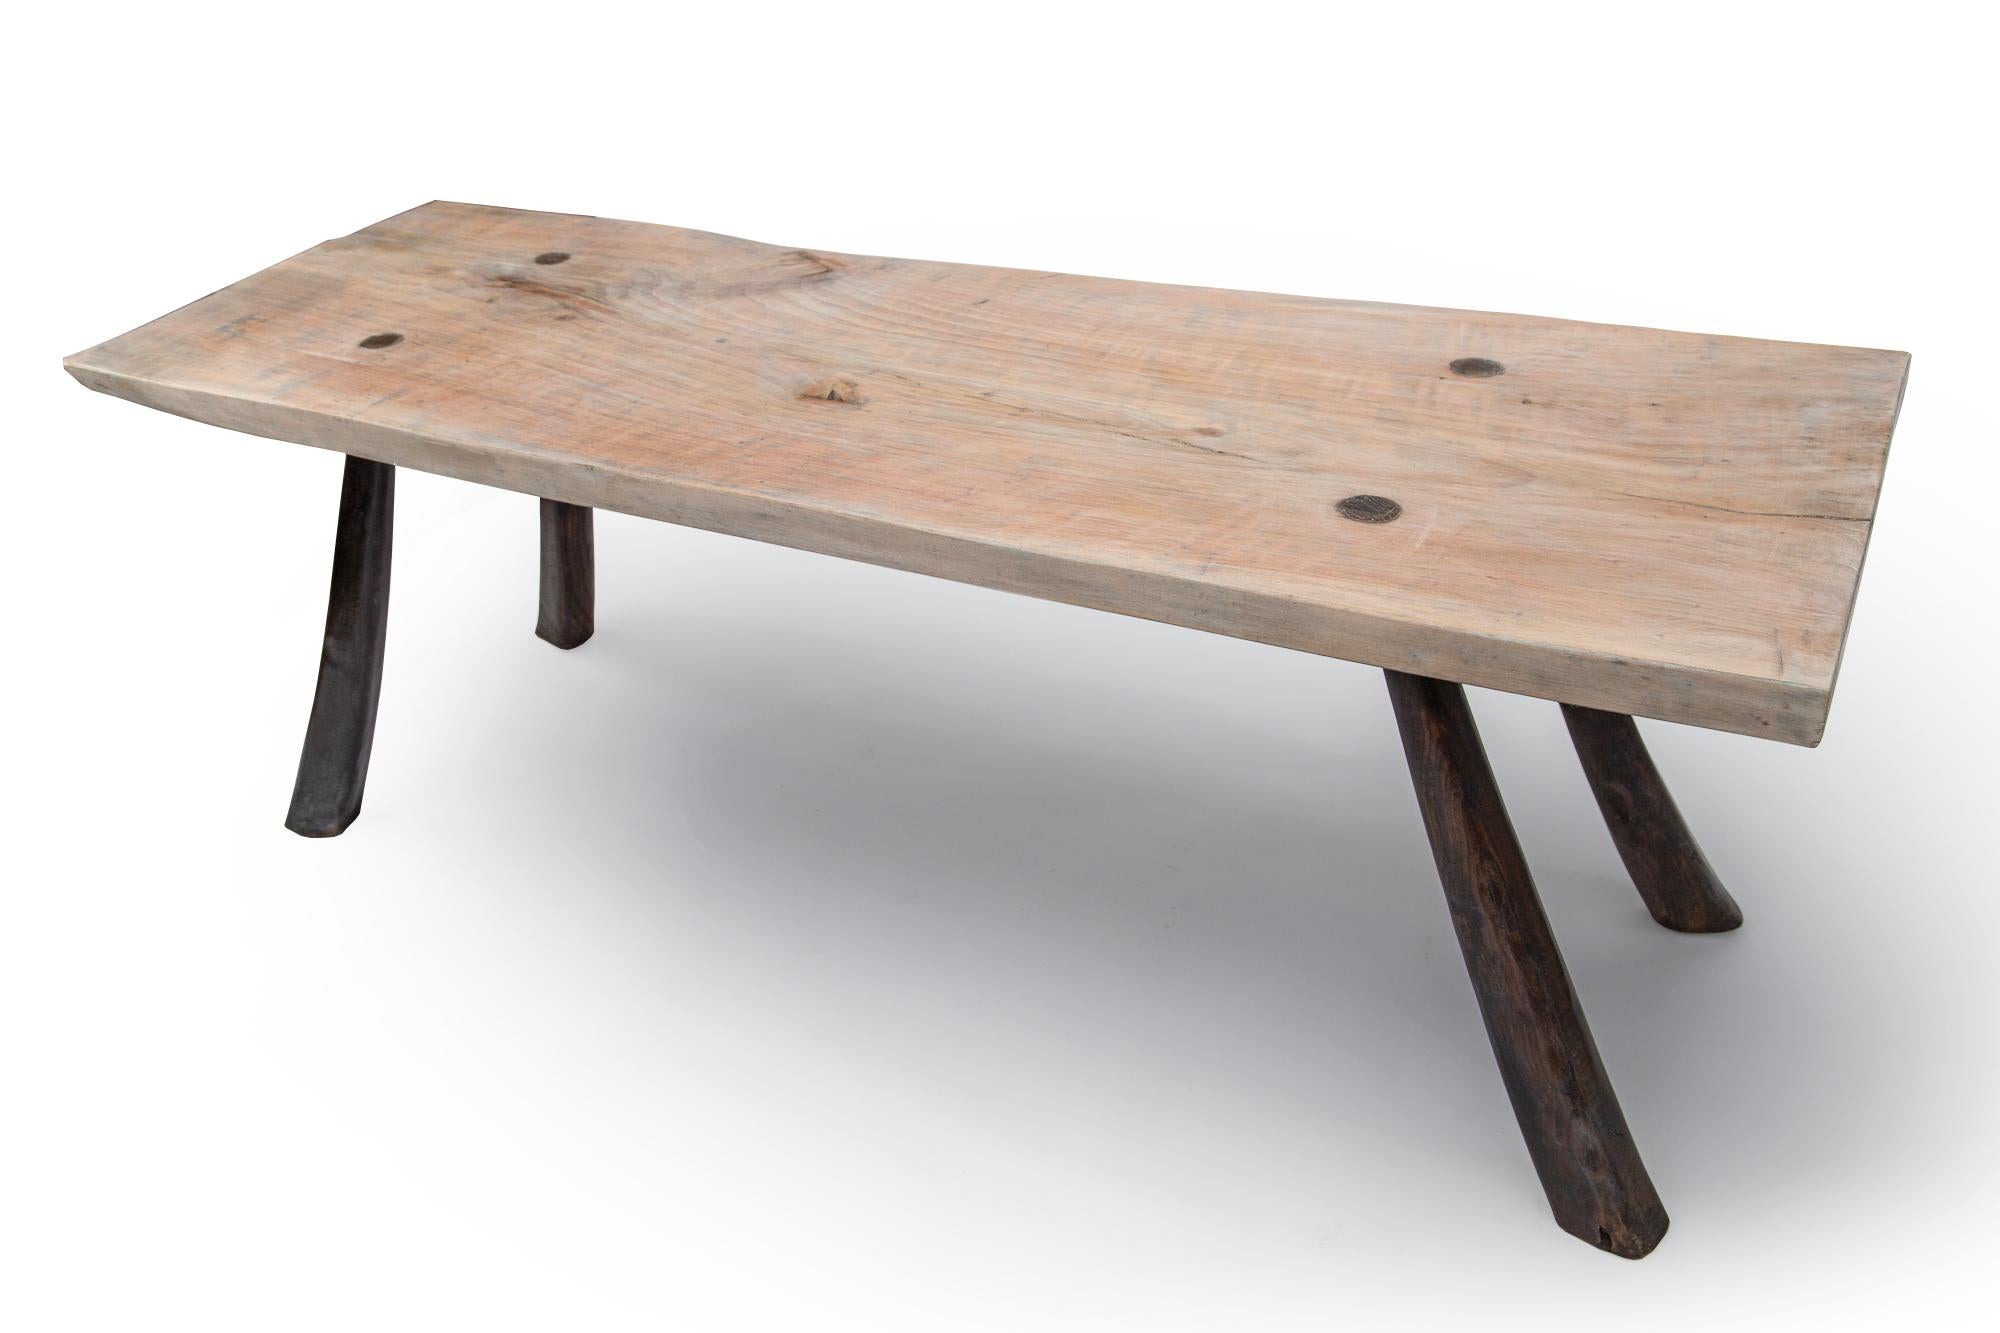 Spanish Olive Wood Constructivist Table from the Balearics, early 20th C